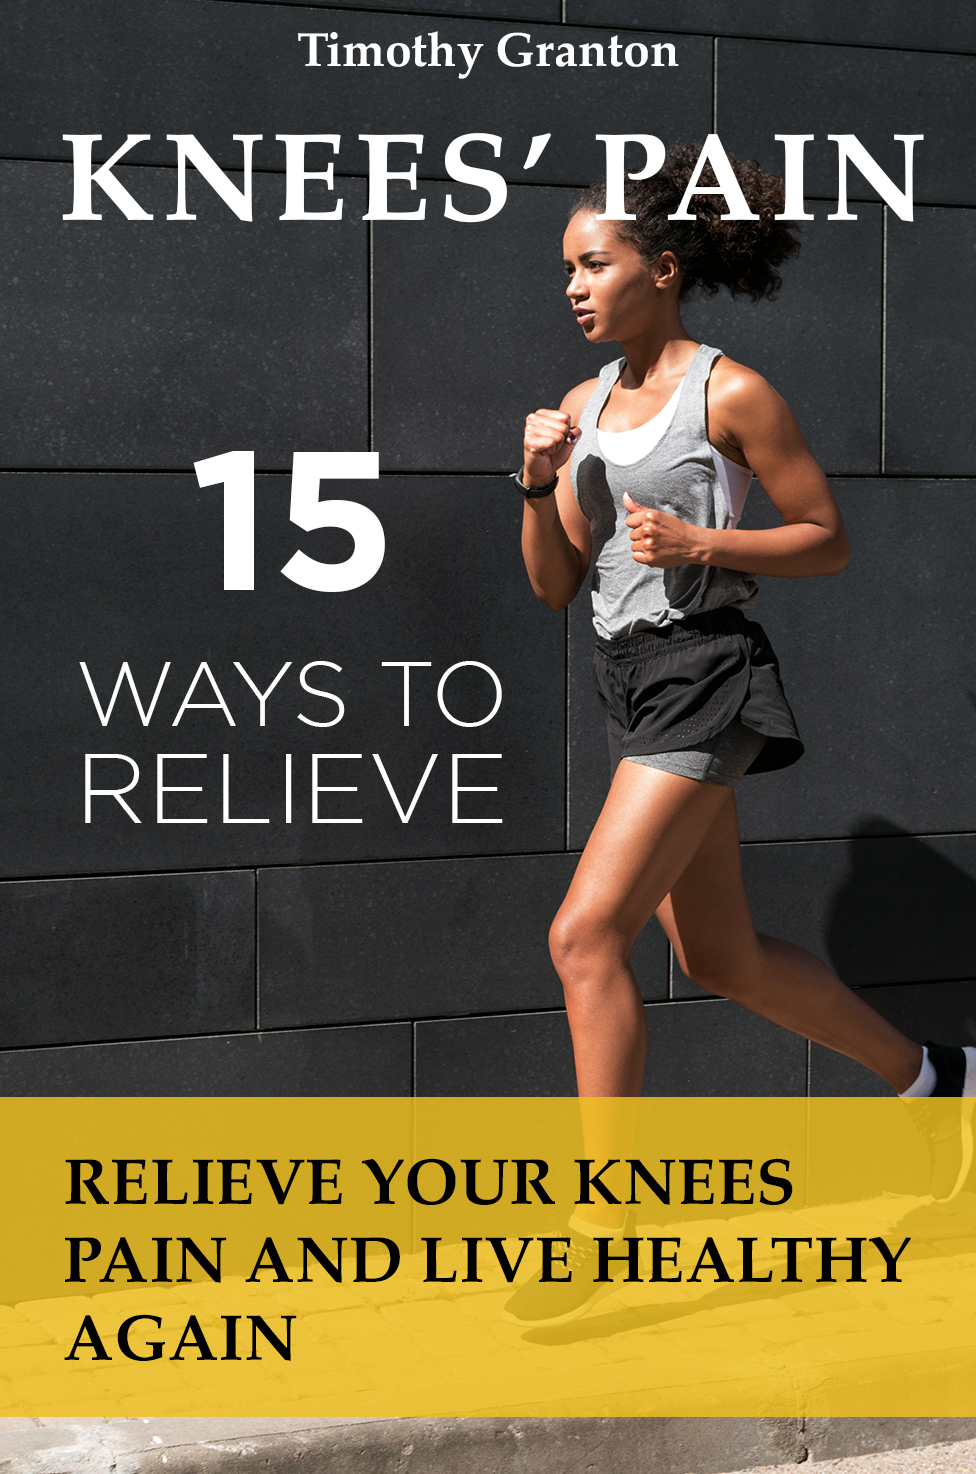 FREE: 15 Ways to Relieve Knees’ Pain: Relieve Your Knees Pain and Live Healthy Again by Timothy Granton